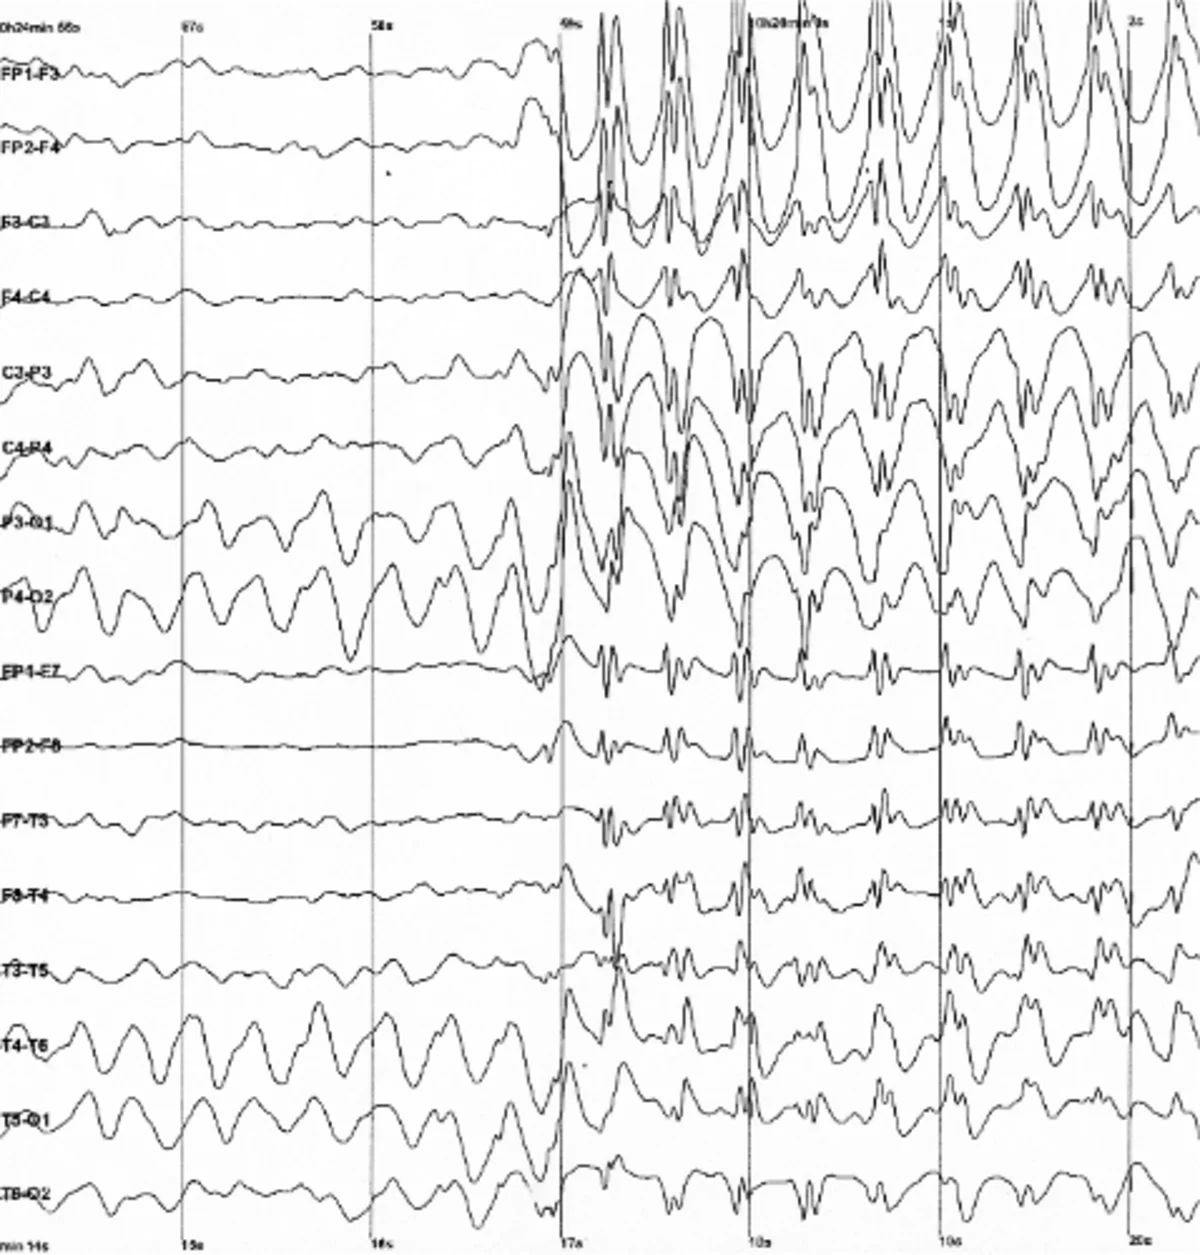 Spike and wave discharges monitored with EEG 